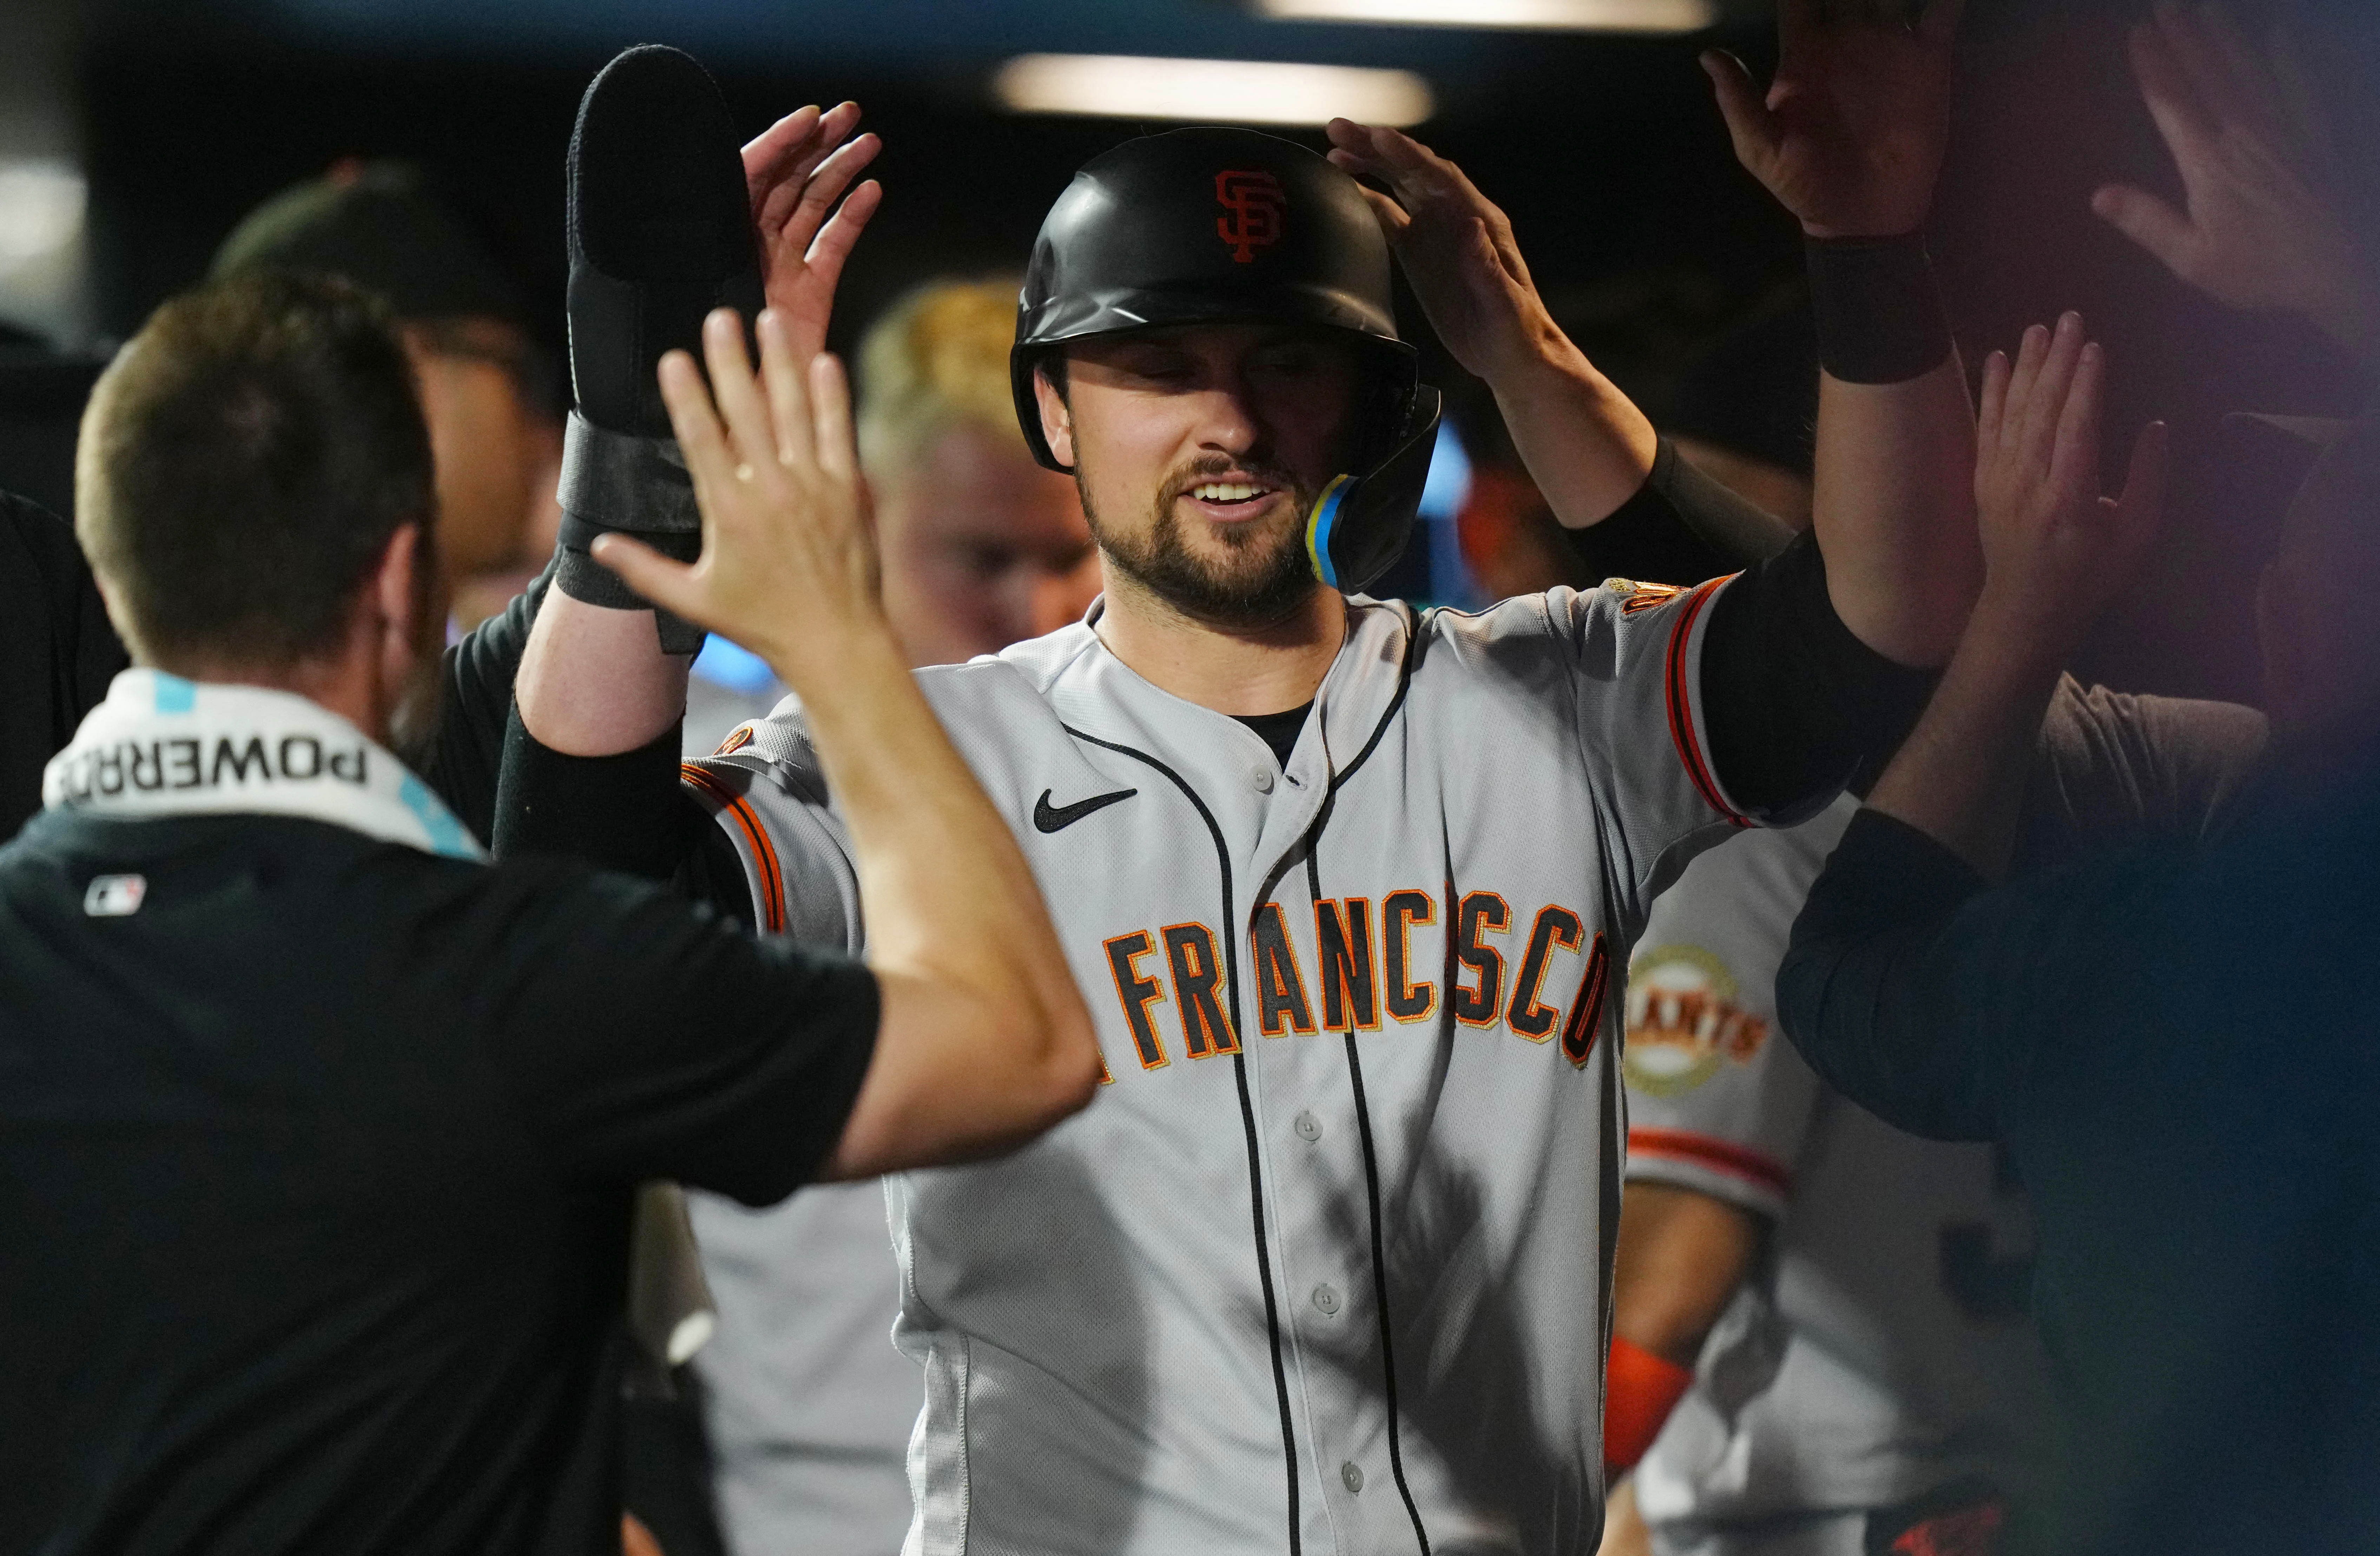 Angels News: Randall Grichuk Reacts to Fan Backlash Over Uniform